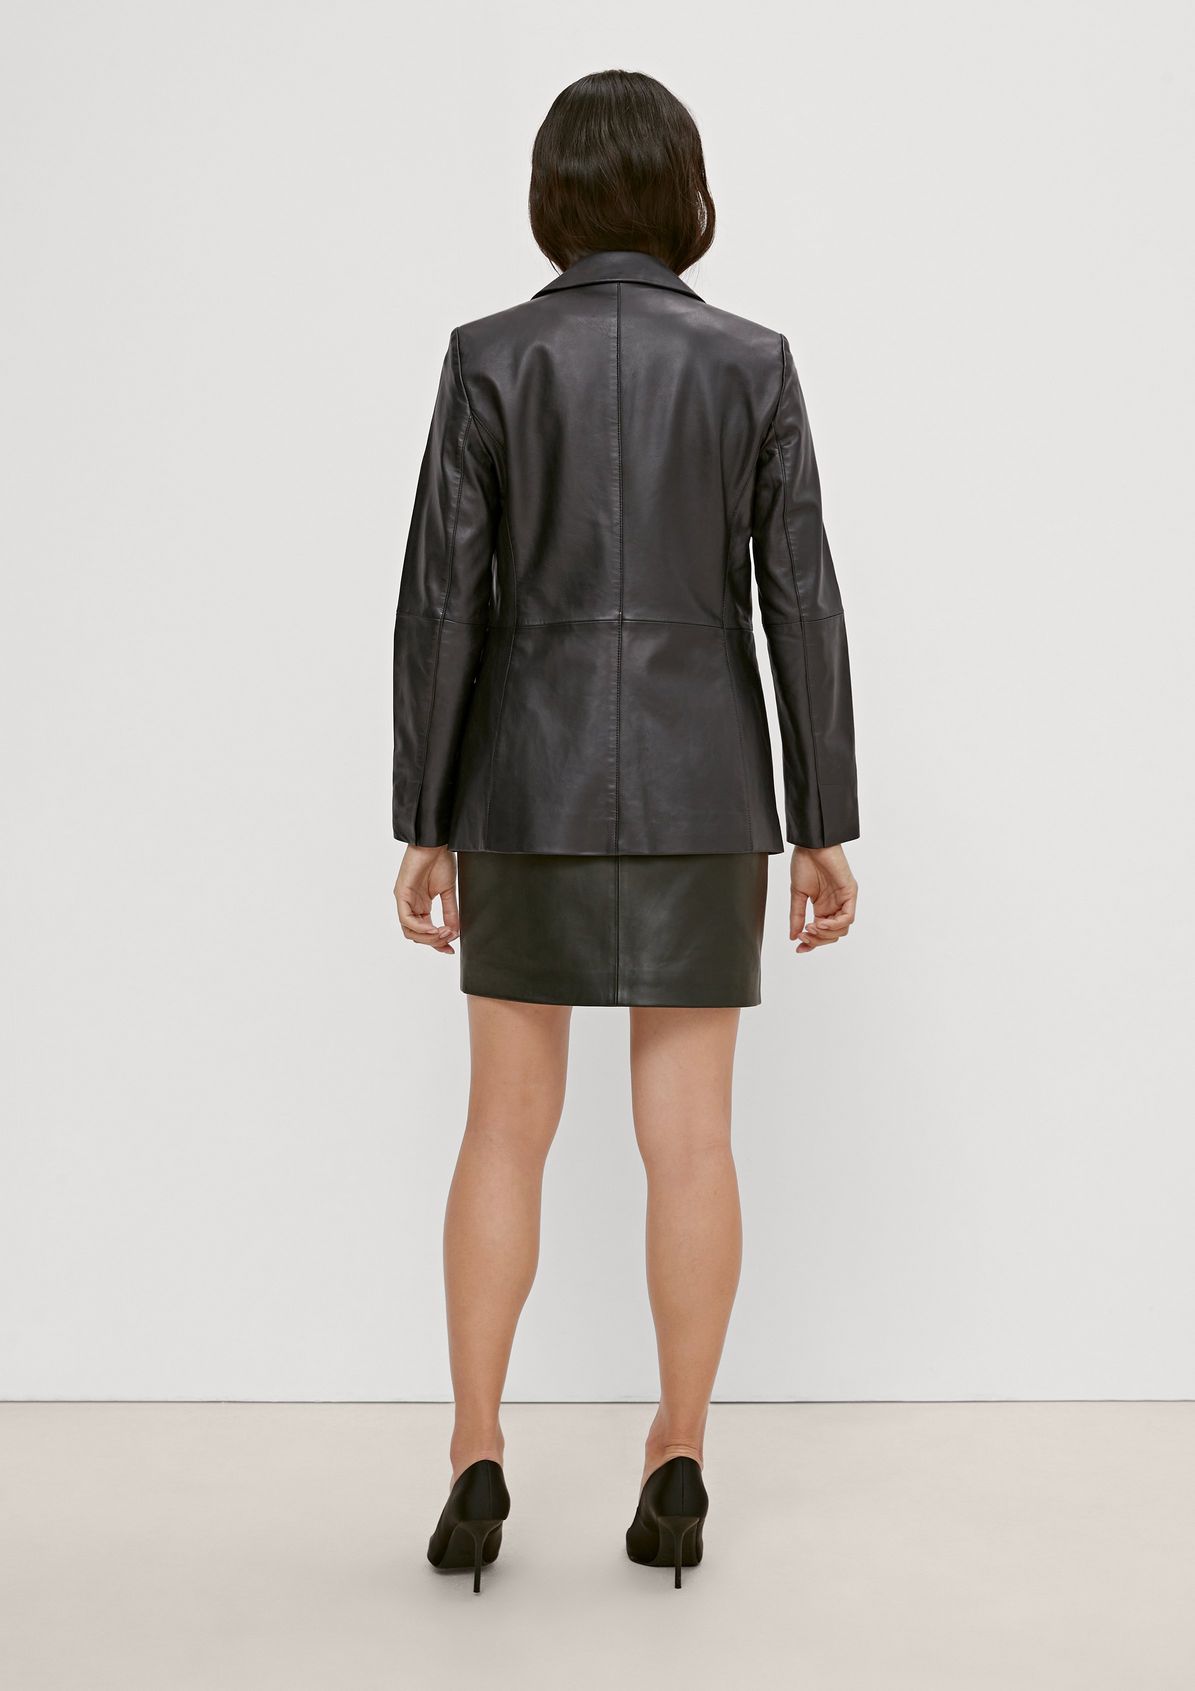 Lamb leather blazer from comma